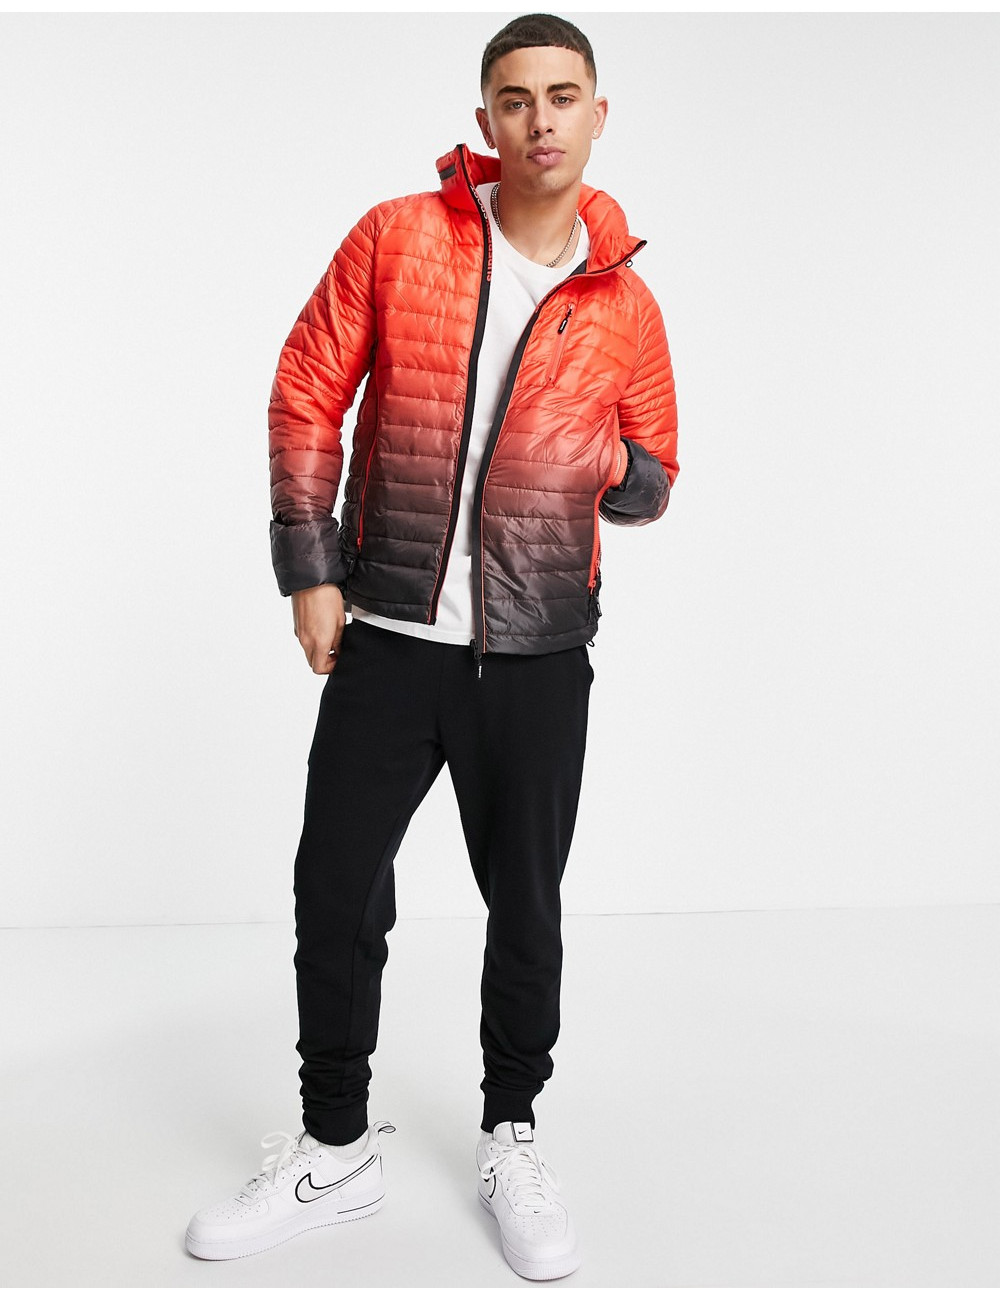 Superdry power fade jacket